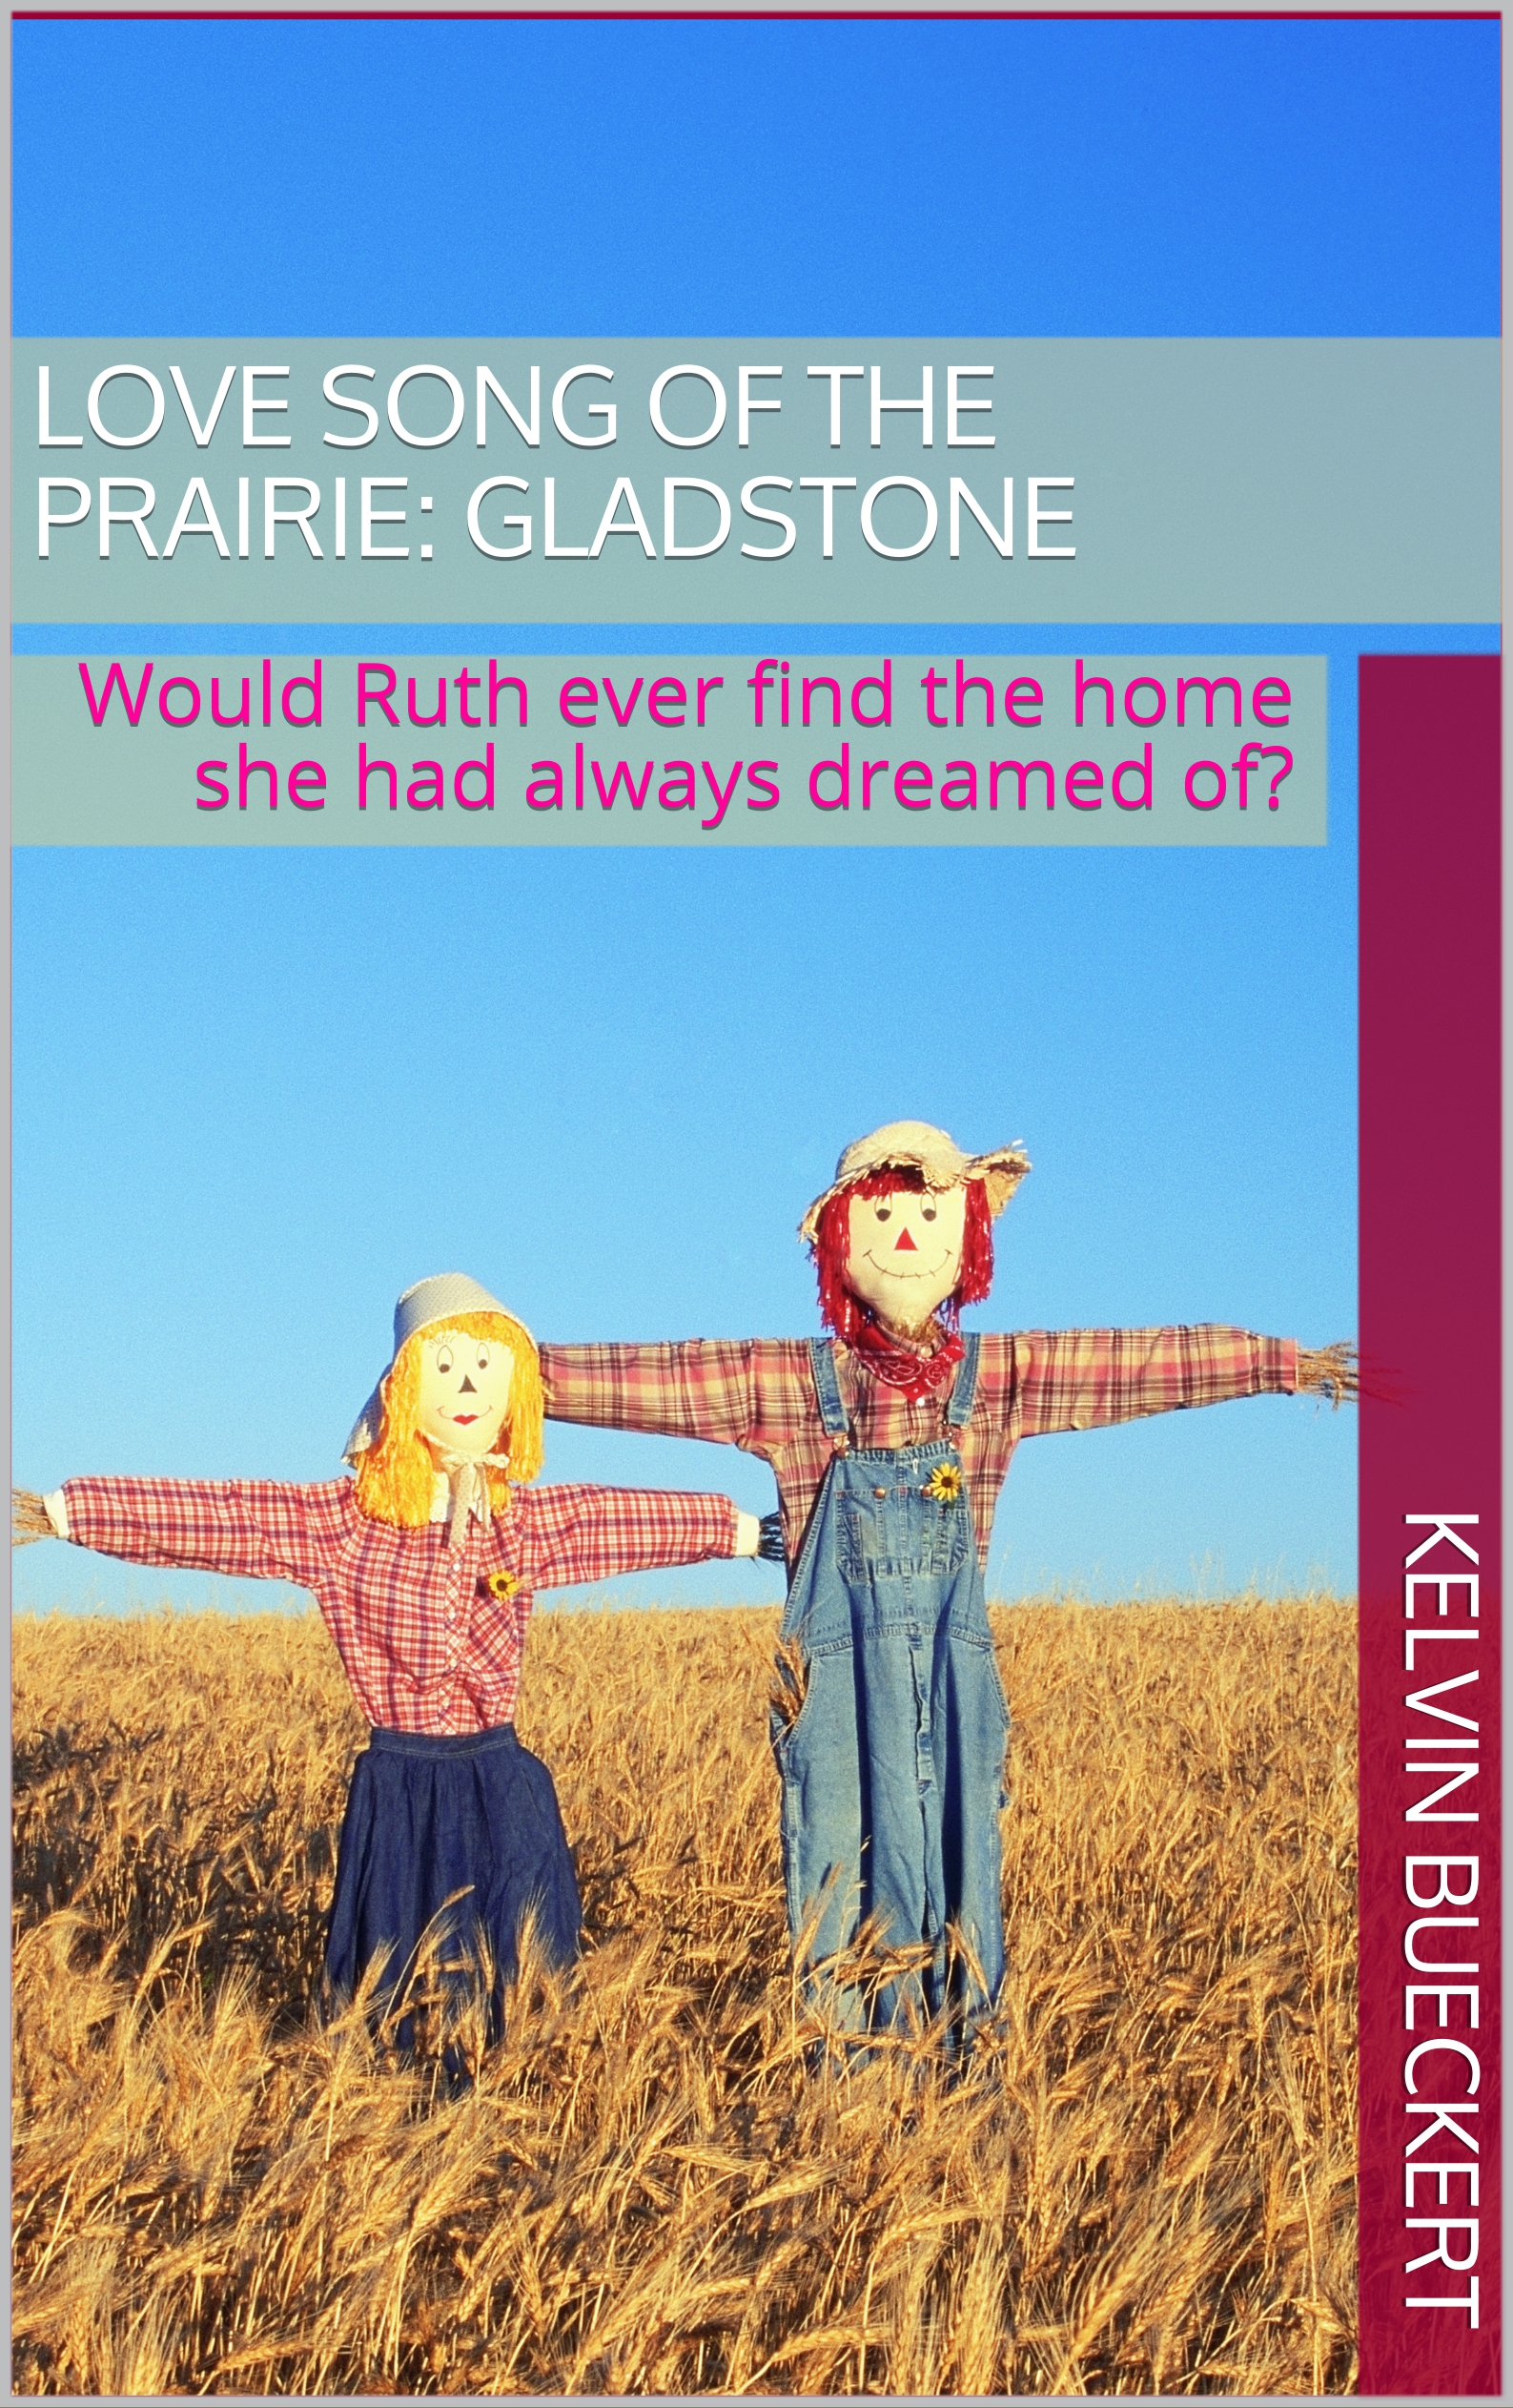 FREE: Love Song of the Prairie: Gladstone by Kelvin Bueckert